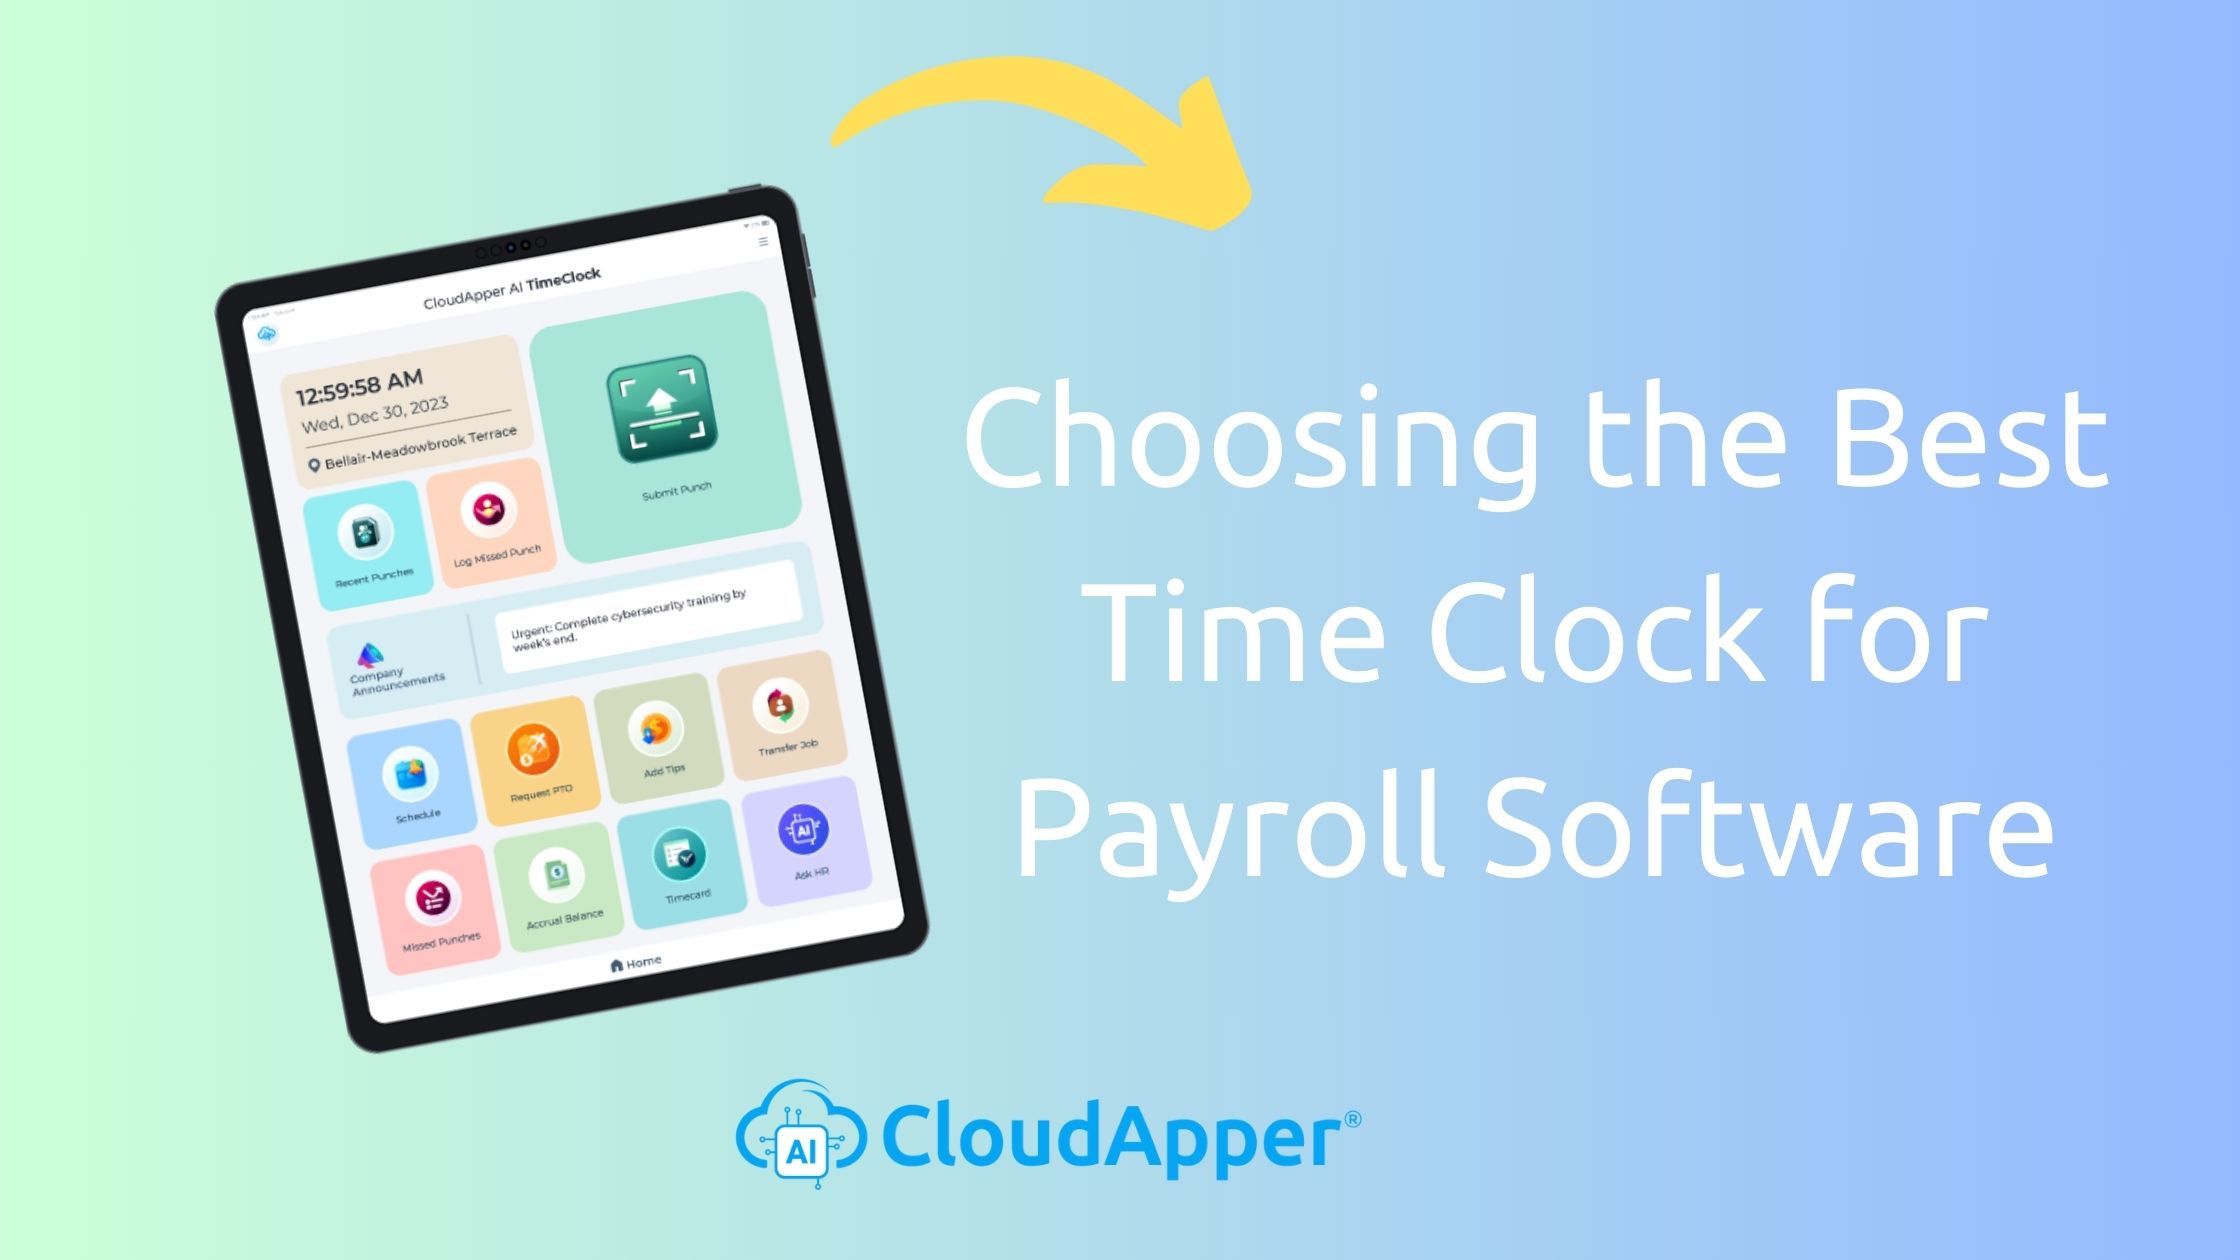 Choosing the Best Time Clock for Payroll Software